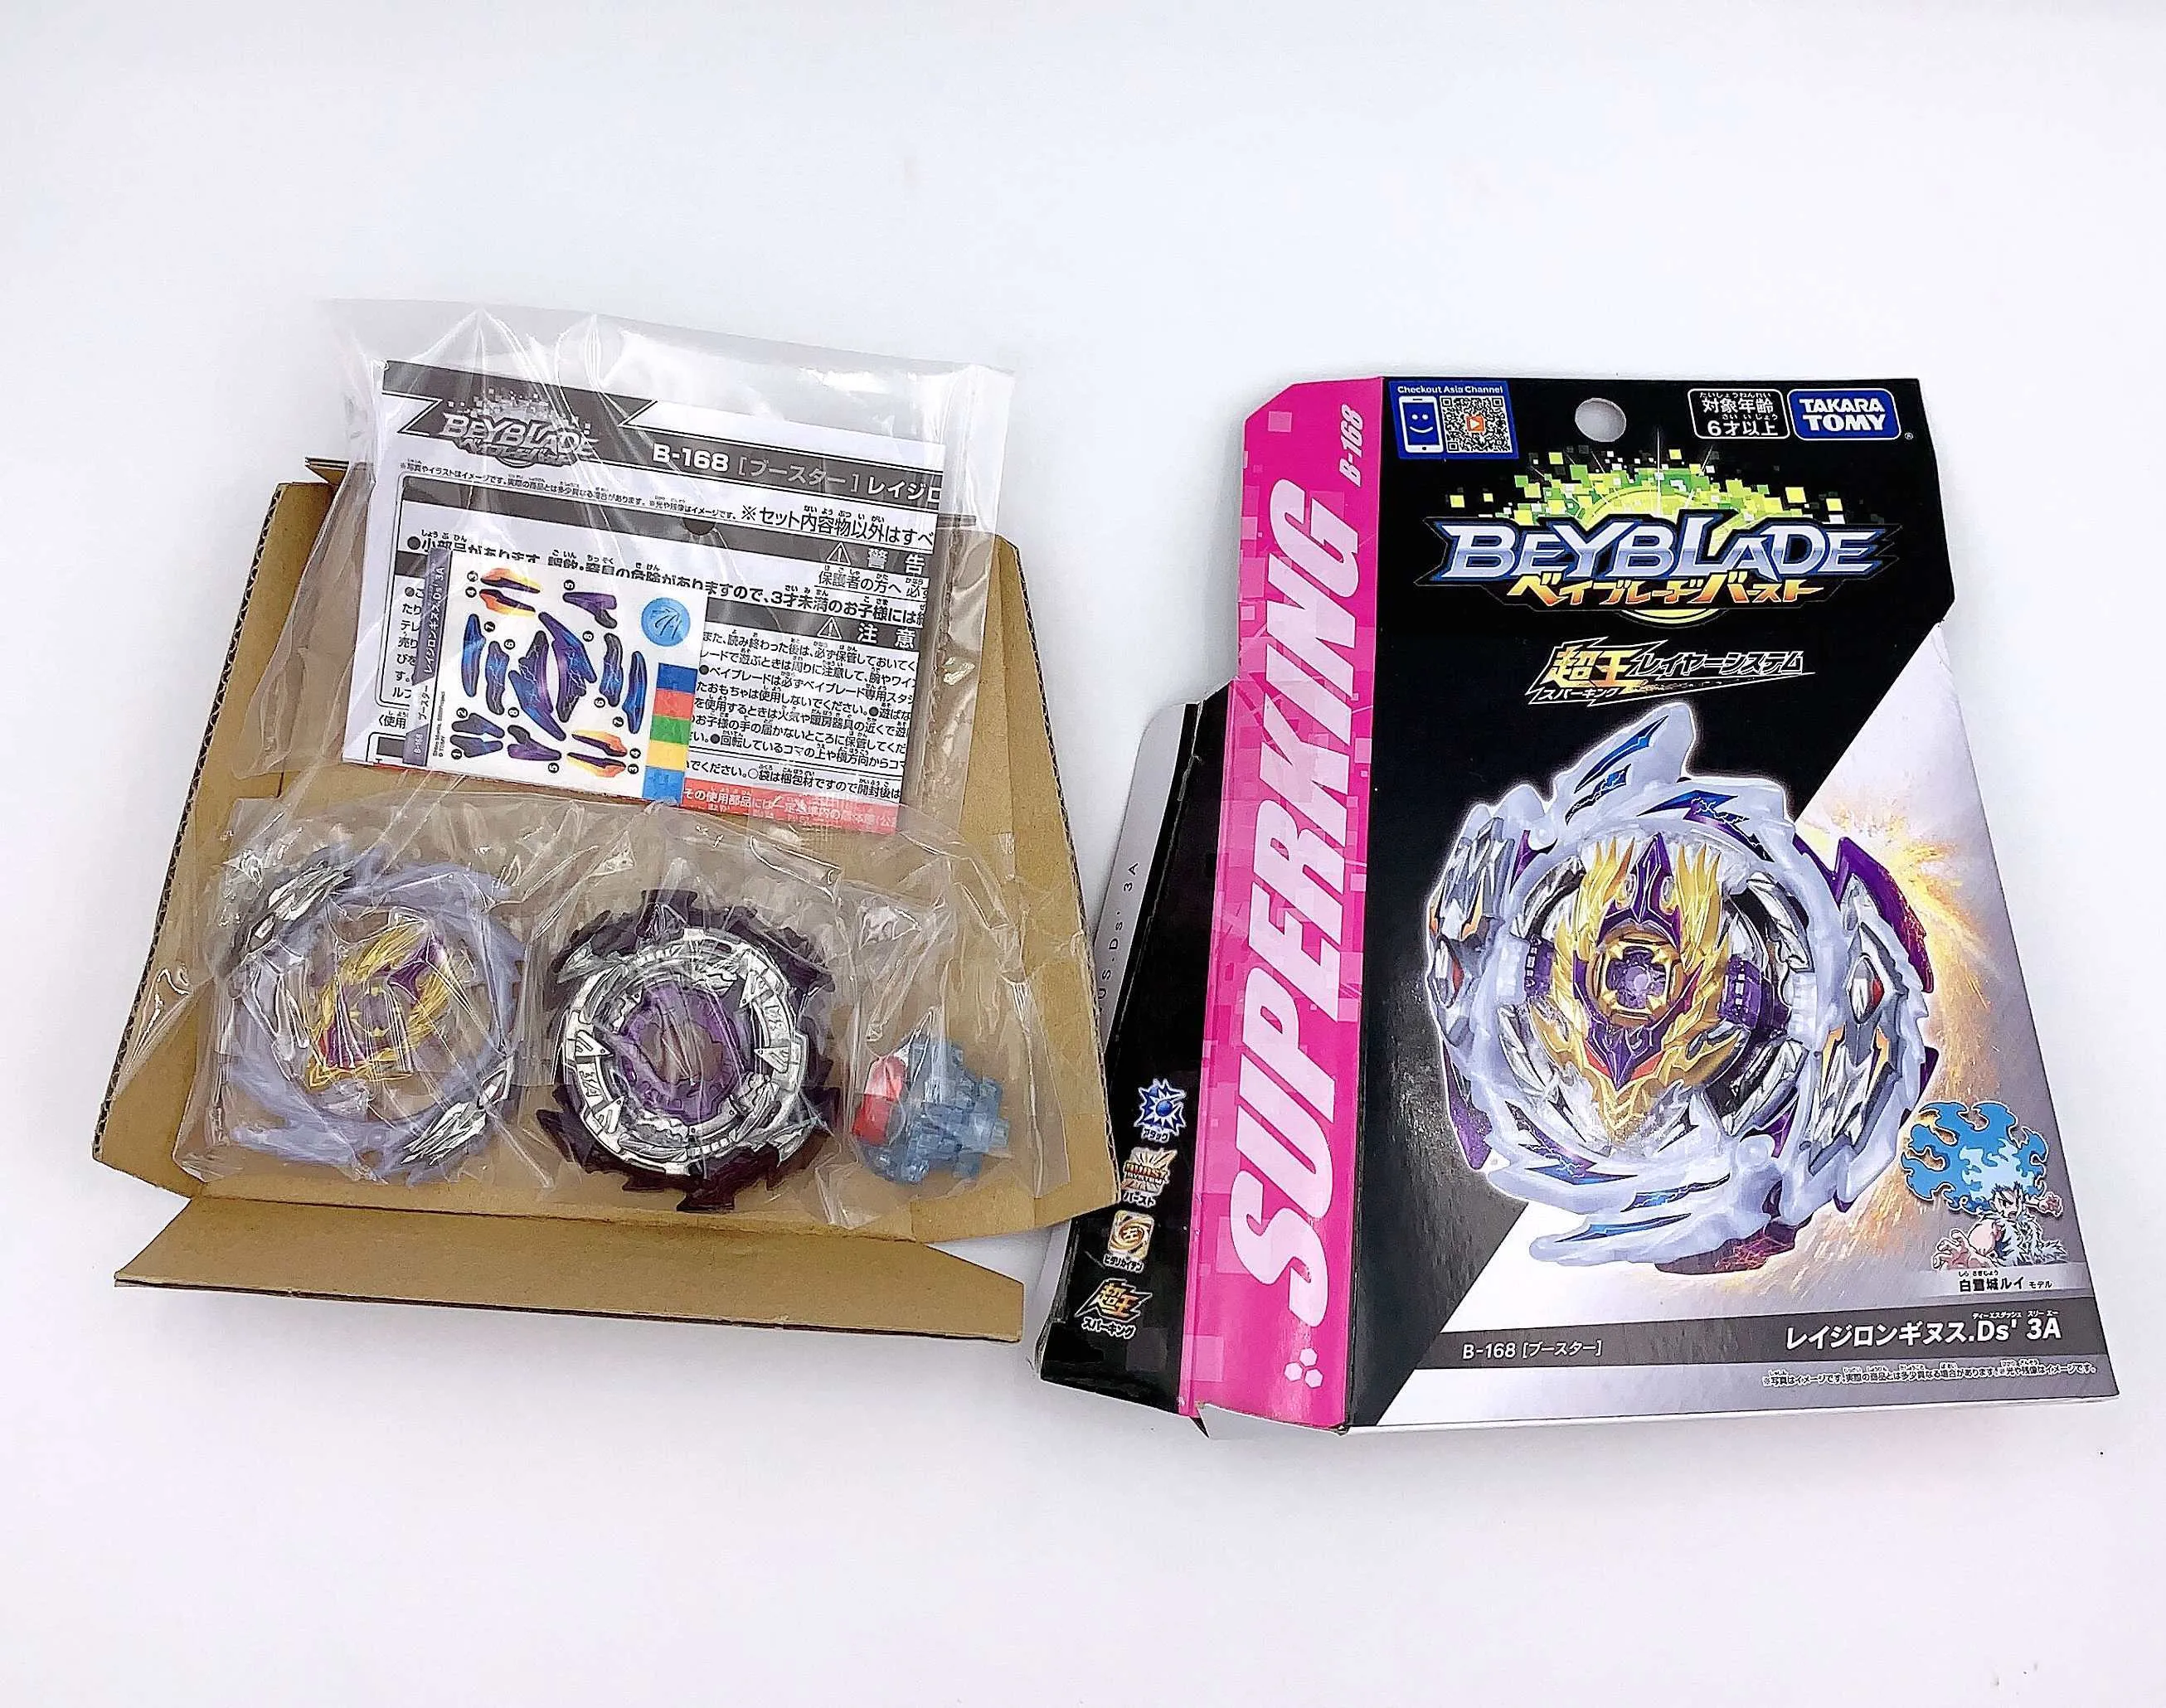 Takara Tomy Beyblade Super King B168 Furious Holy Gun Overlord Blast Metal Fusion Battle Gyro Top Toy for Child039s Gift 201213478622